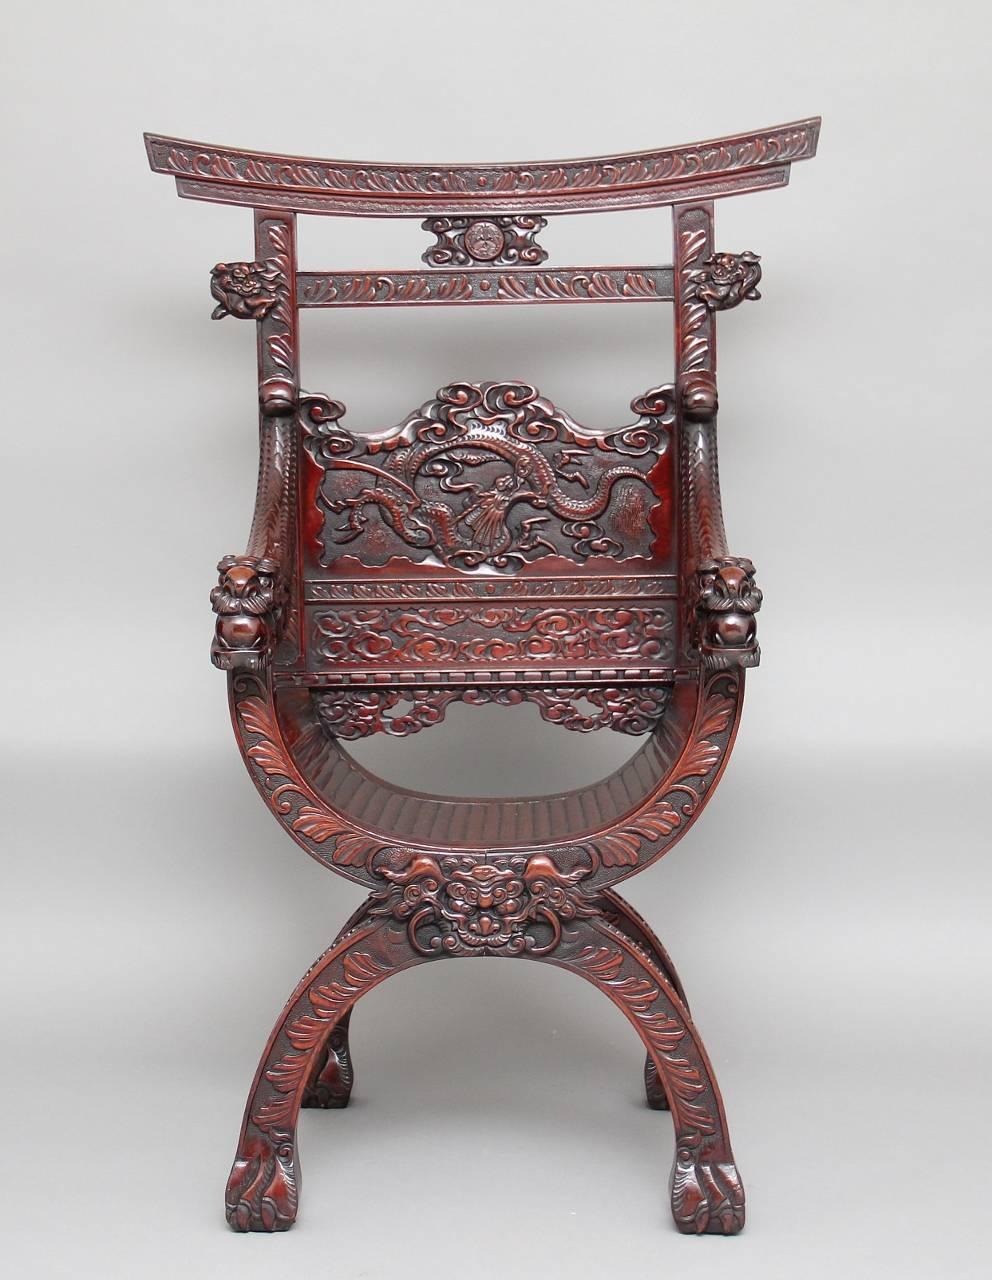 19th century Chinese throne / armchair profusely carved all-over, the back panel decorated with a carved dragon and carved fret work below, with carved dragon arms united onto a curved seat, supported on a cross frame base standing on paw feet,